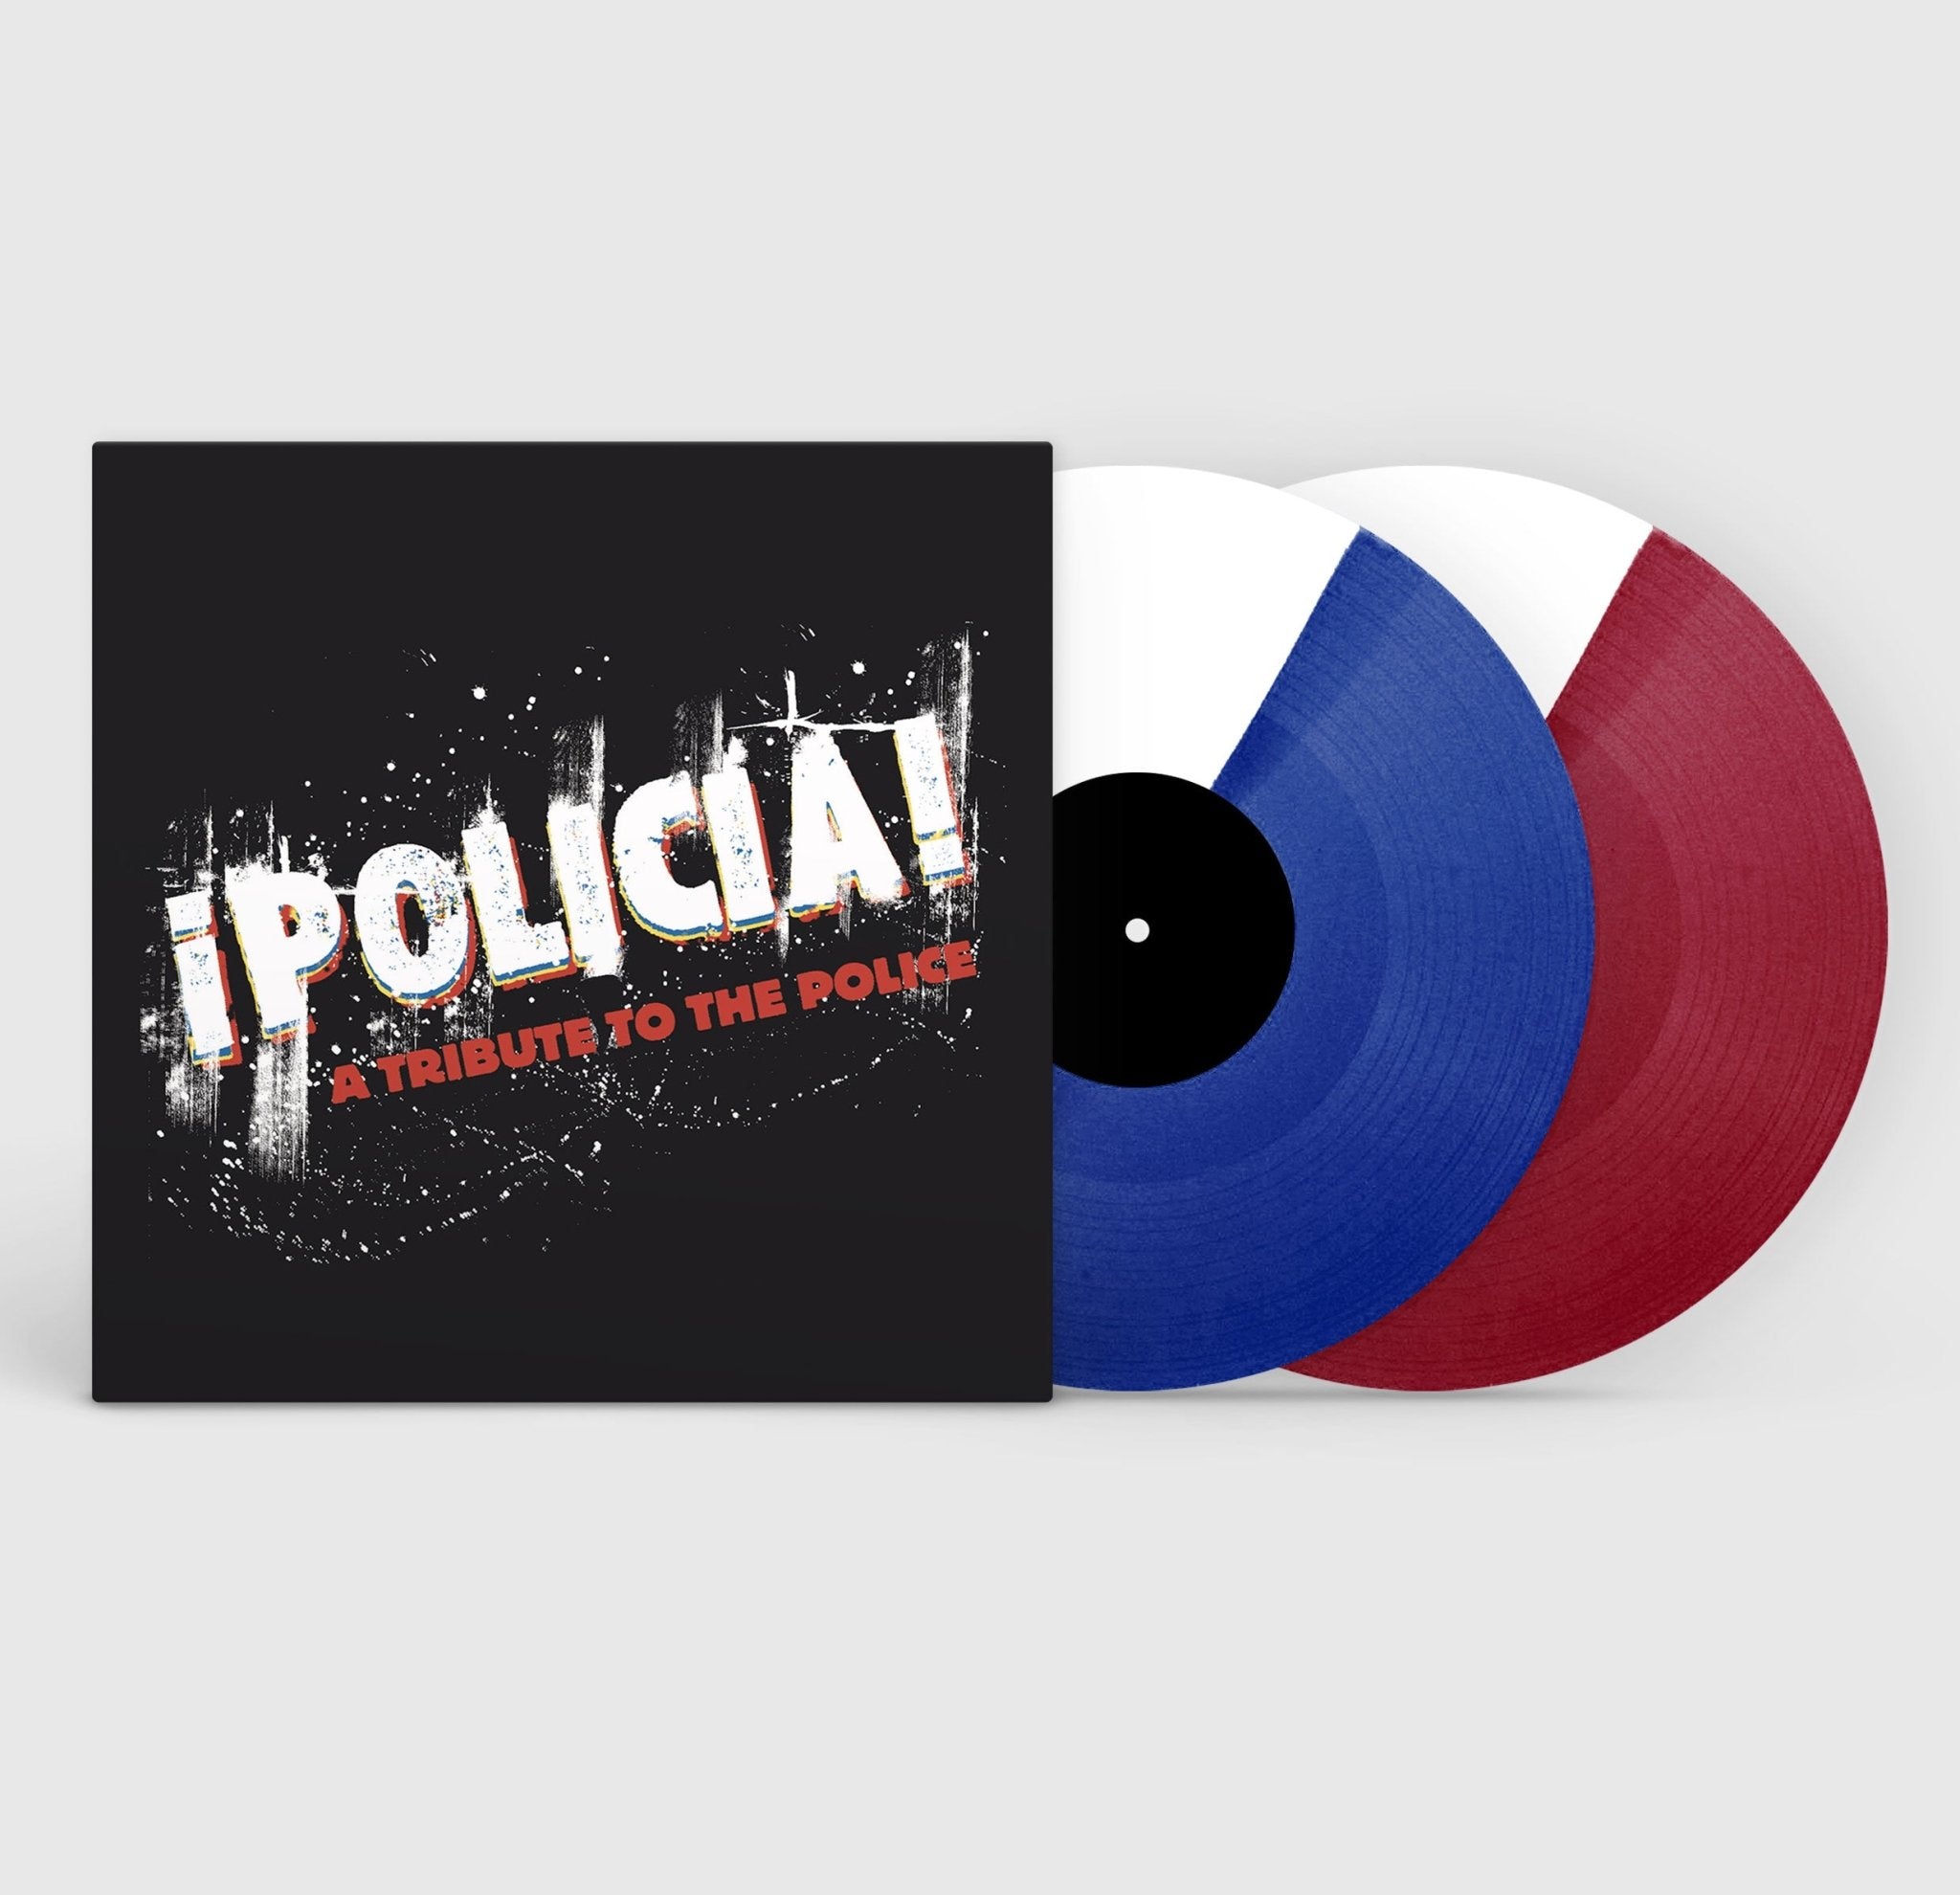 ¡Policia! - A Tribute To The Police 2xLP - Steadfast Records